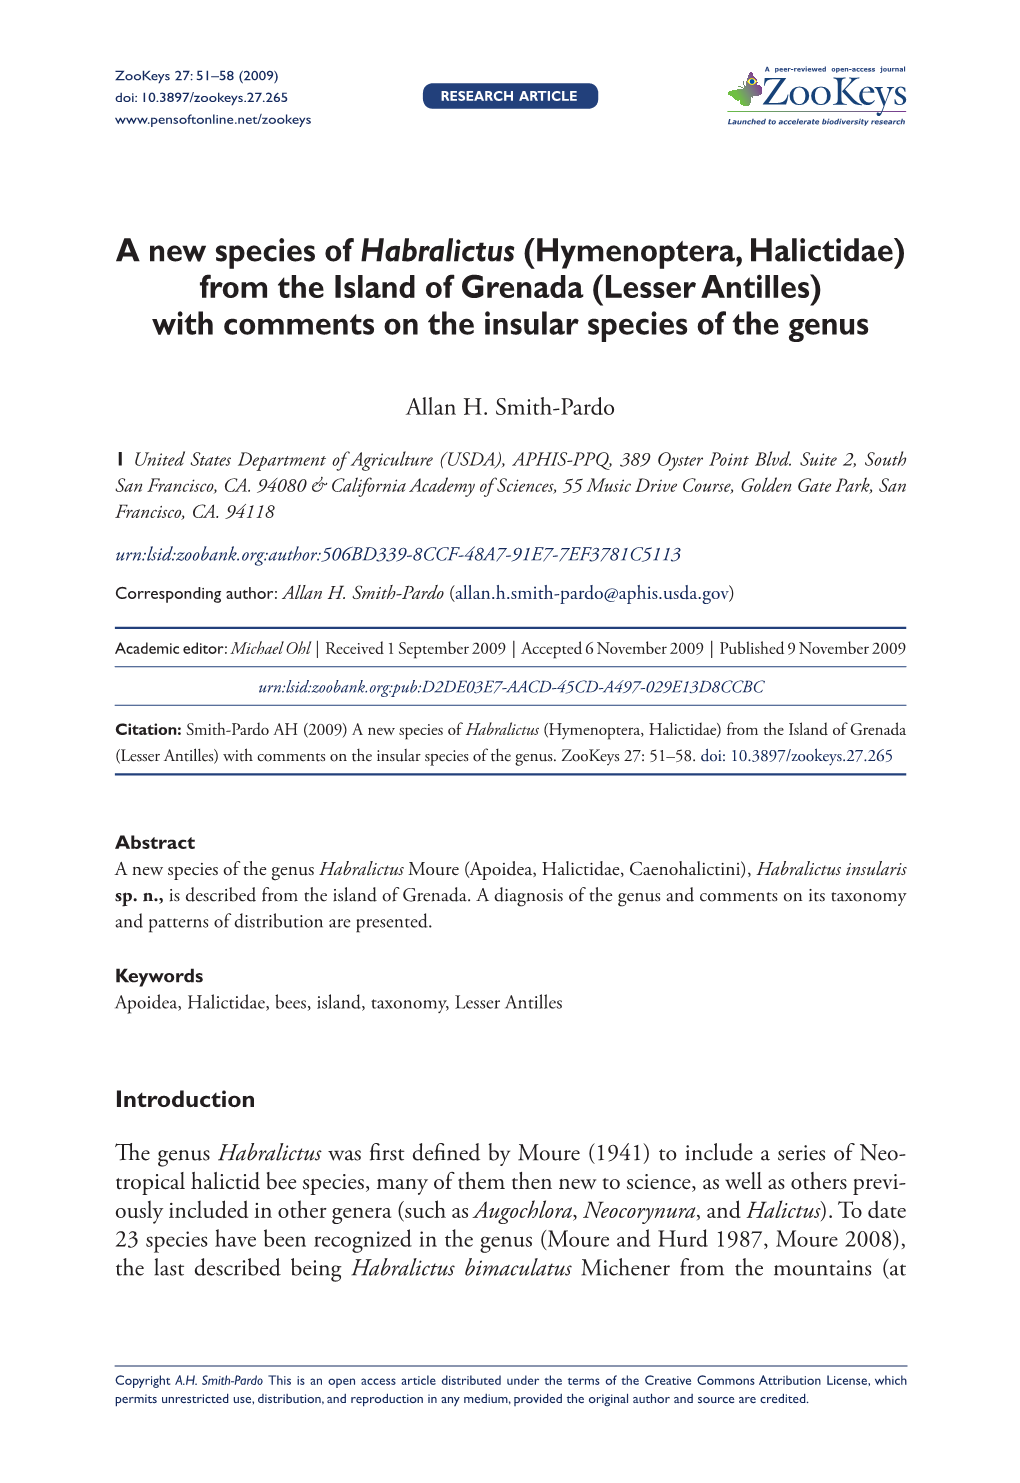 A New Species of Habralictus (Hymenoptera, Halictidae) from the Island of Grenada (Lesser Antilles) with Comments on the Insular Species of the Genus